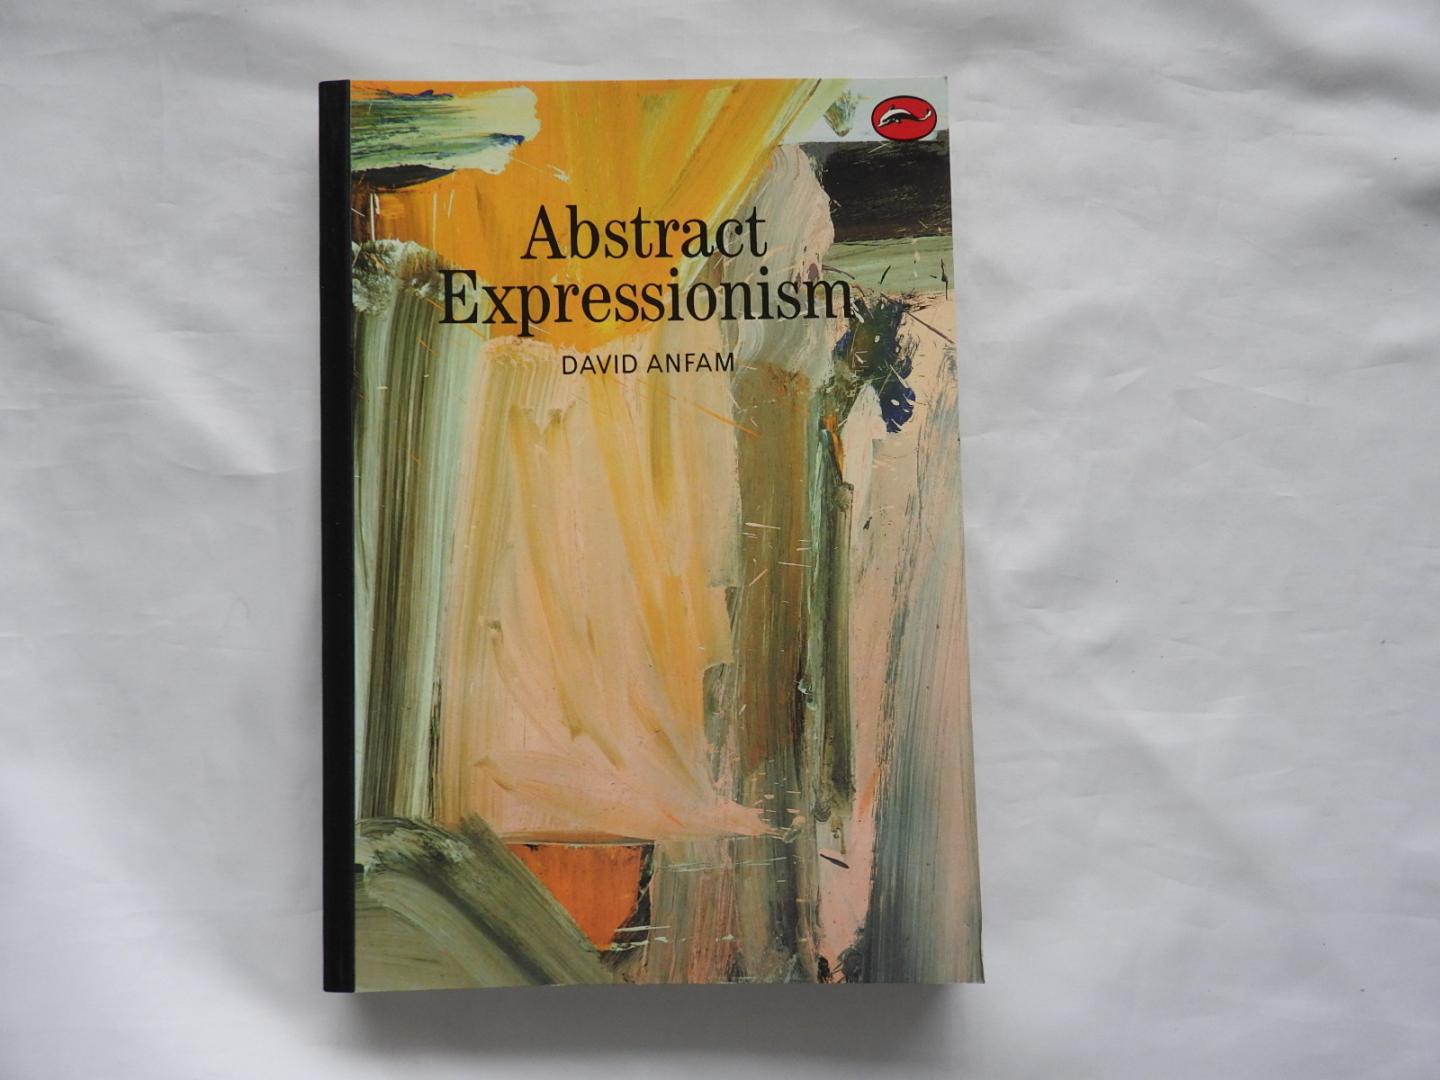 Anfam, David - Abstract Expressionism